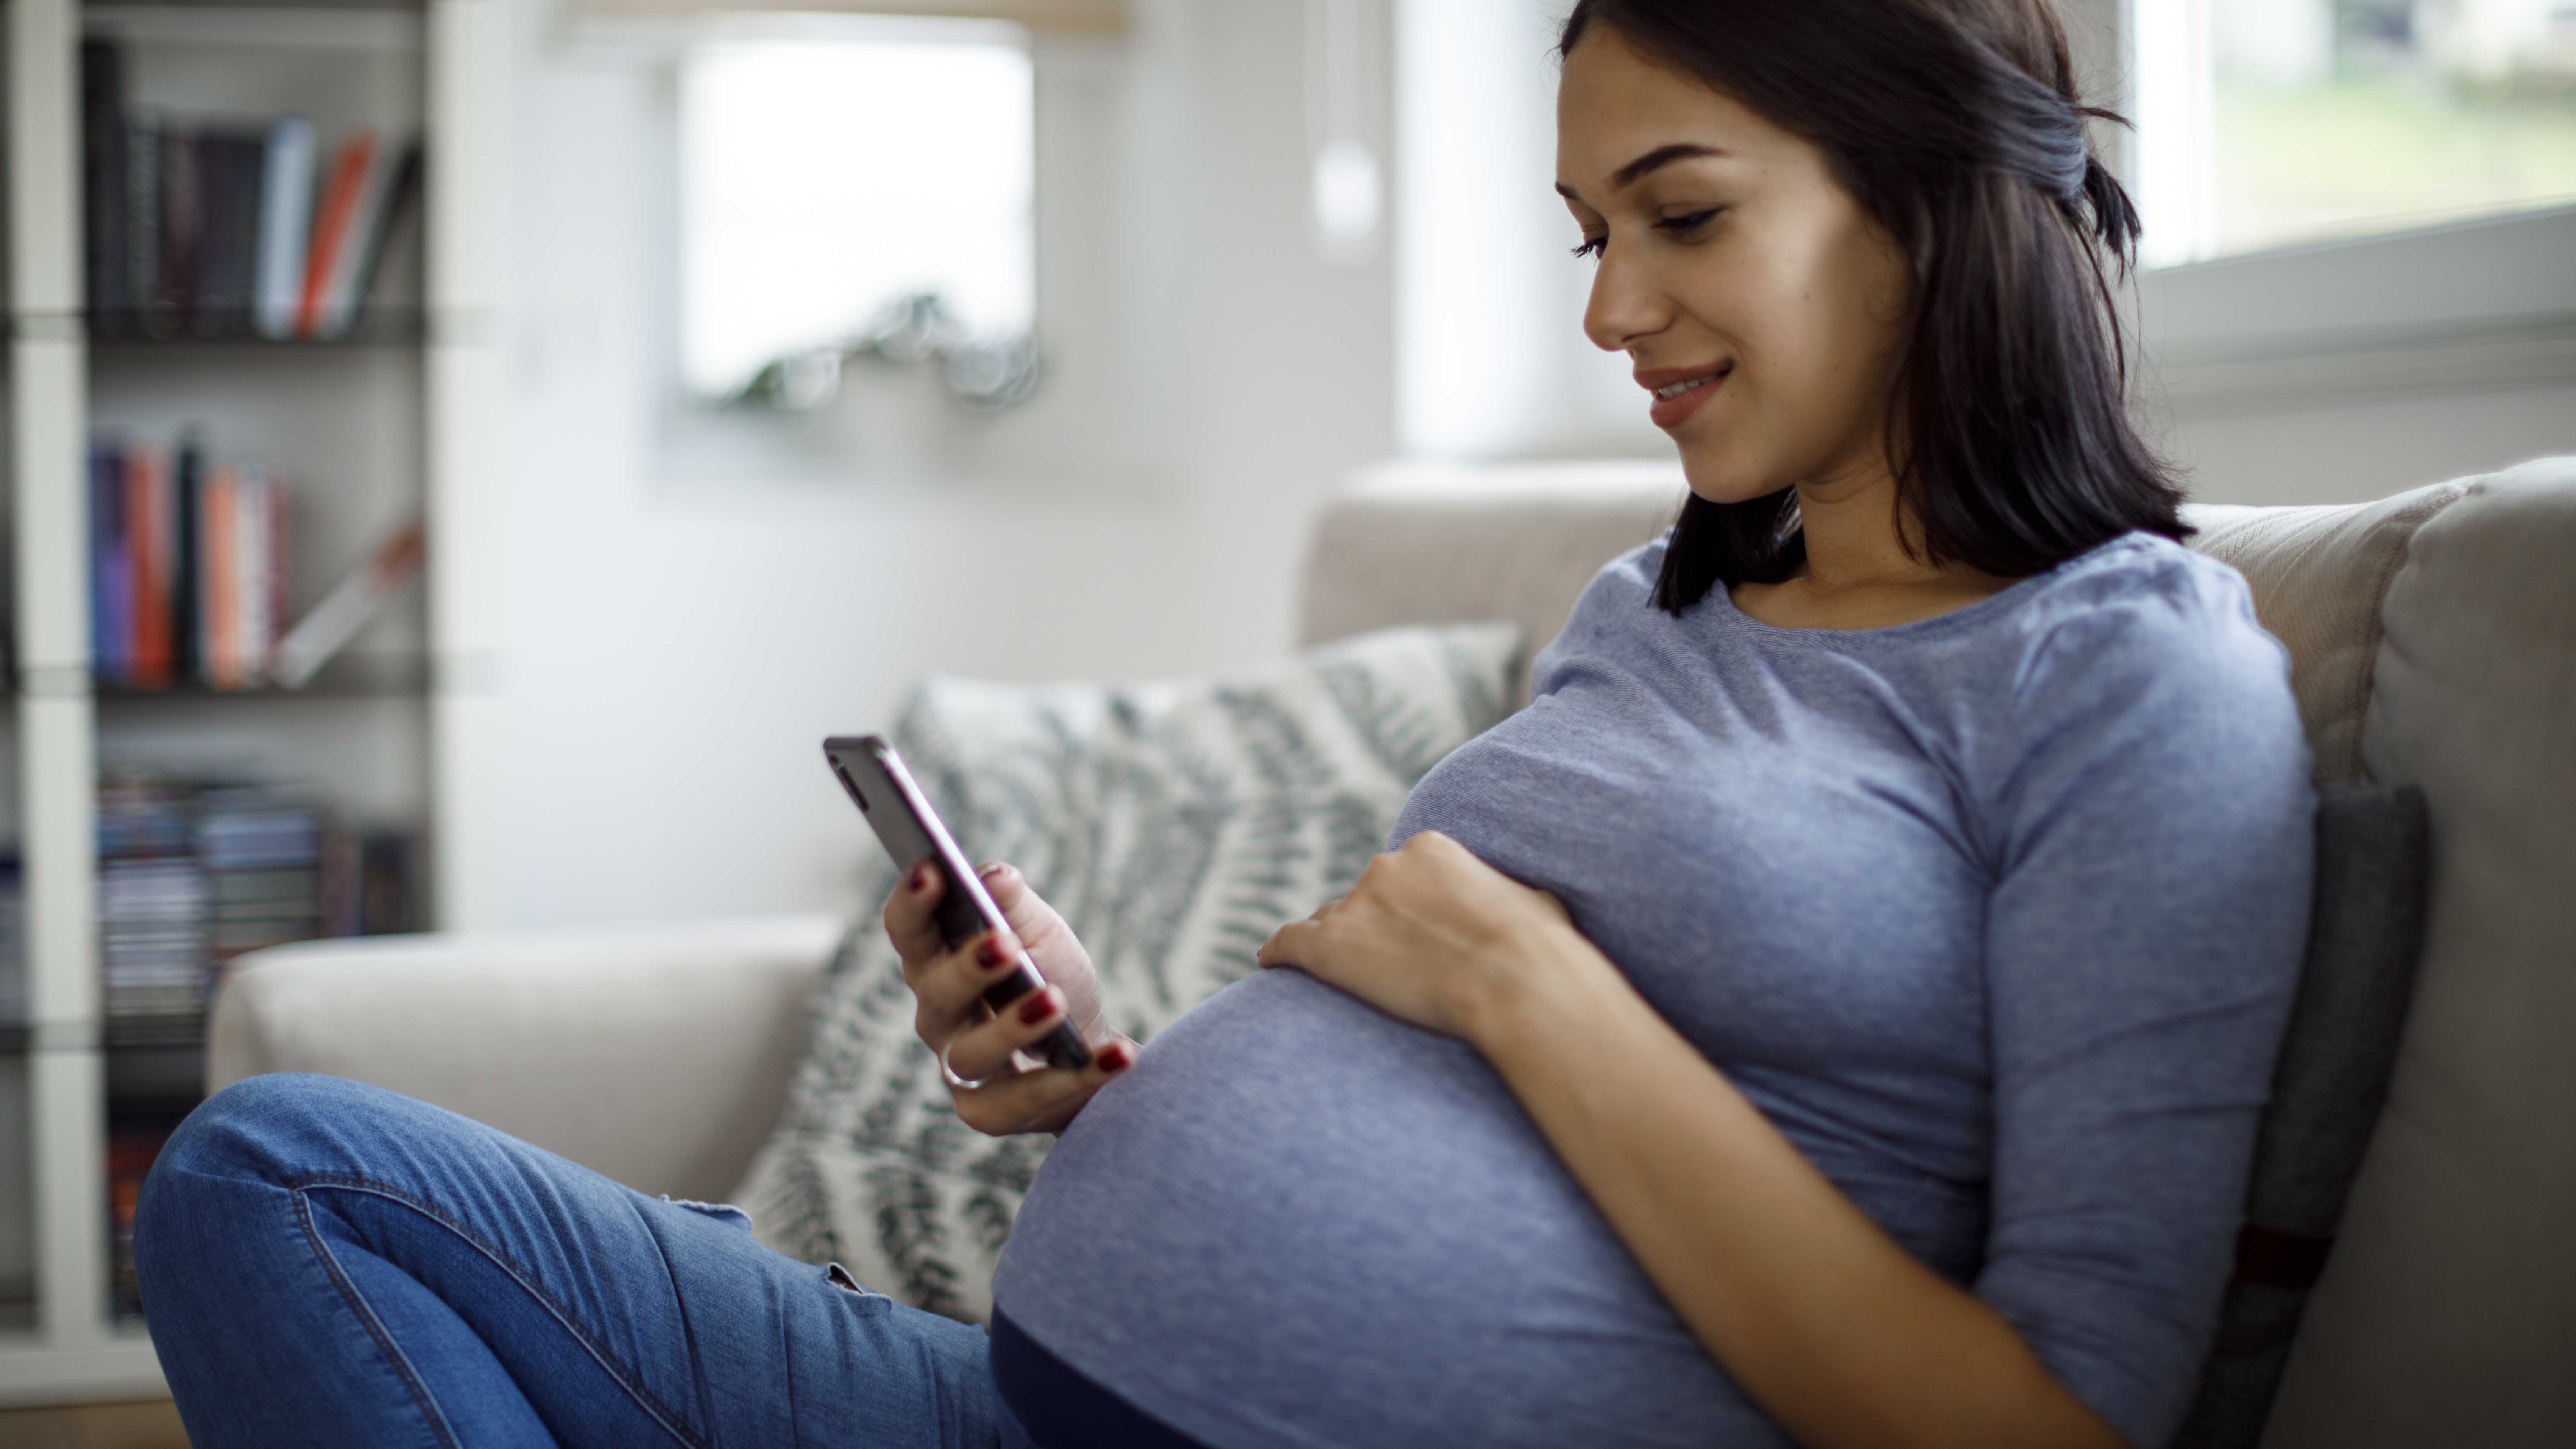  A pregnant woman relaxing on the couch and looking at her phone